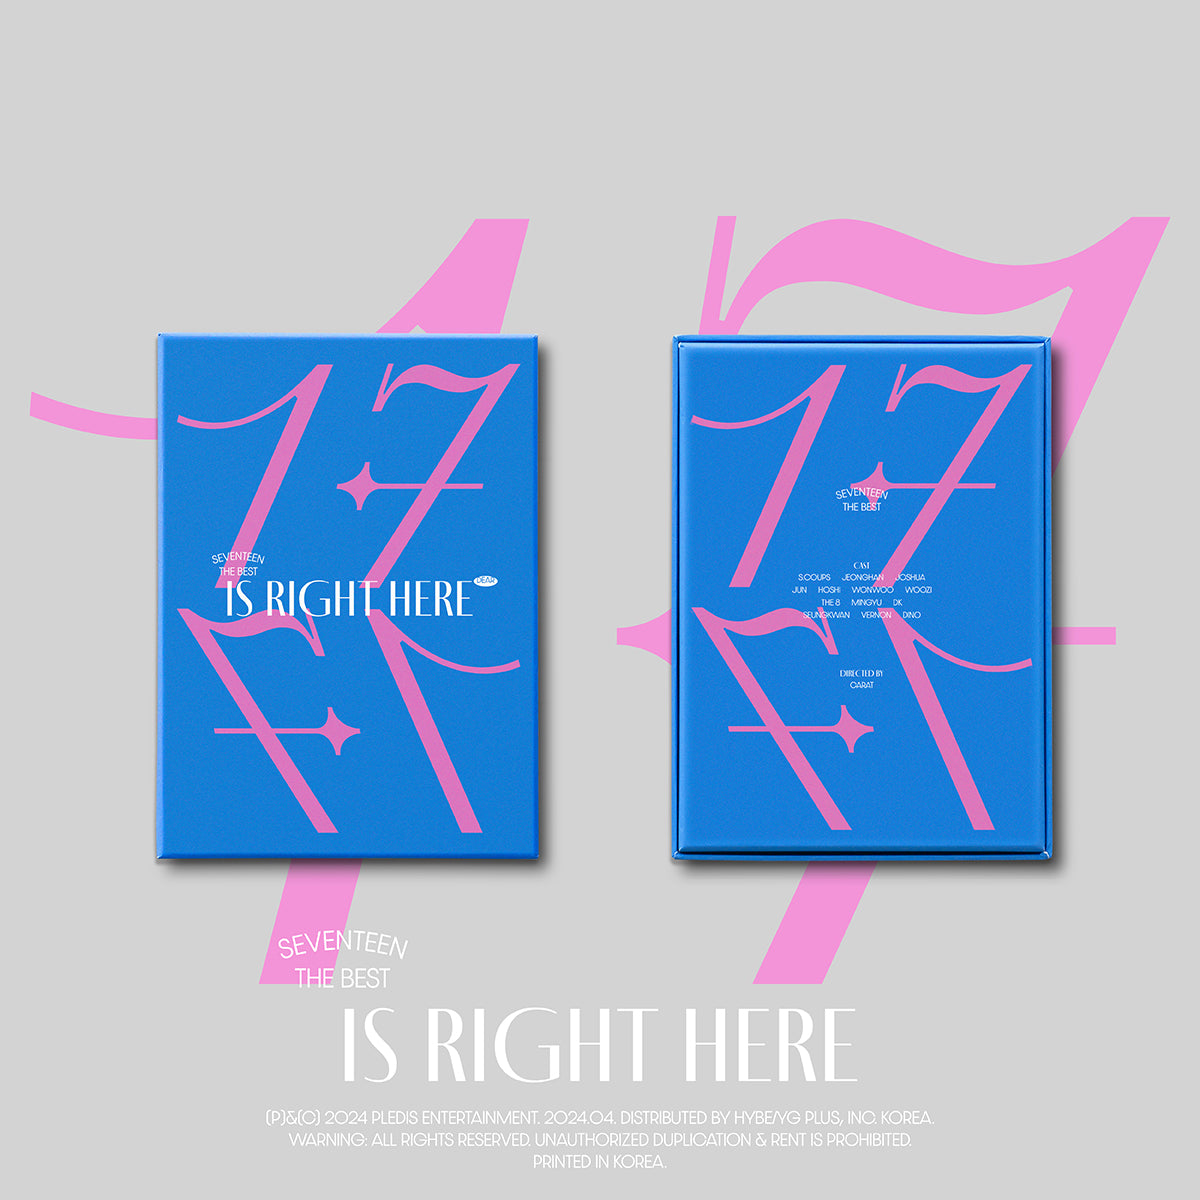 SEVENTEEN - 17 IS RIGHT HERE (DEAR Ver.) [PRE-ORDER]